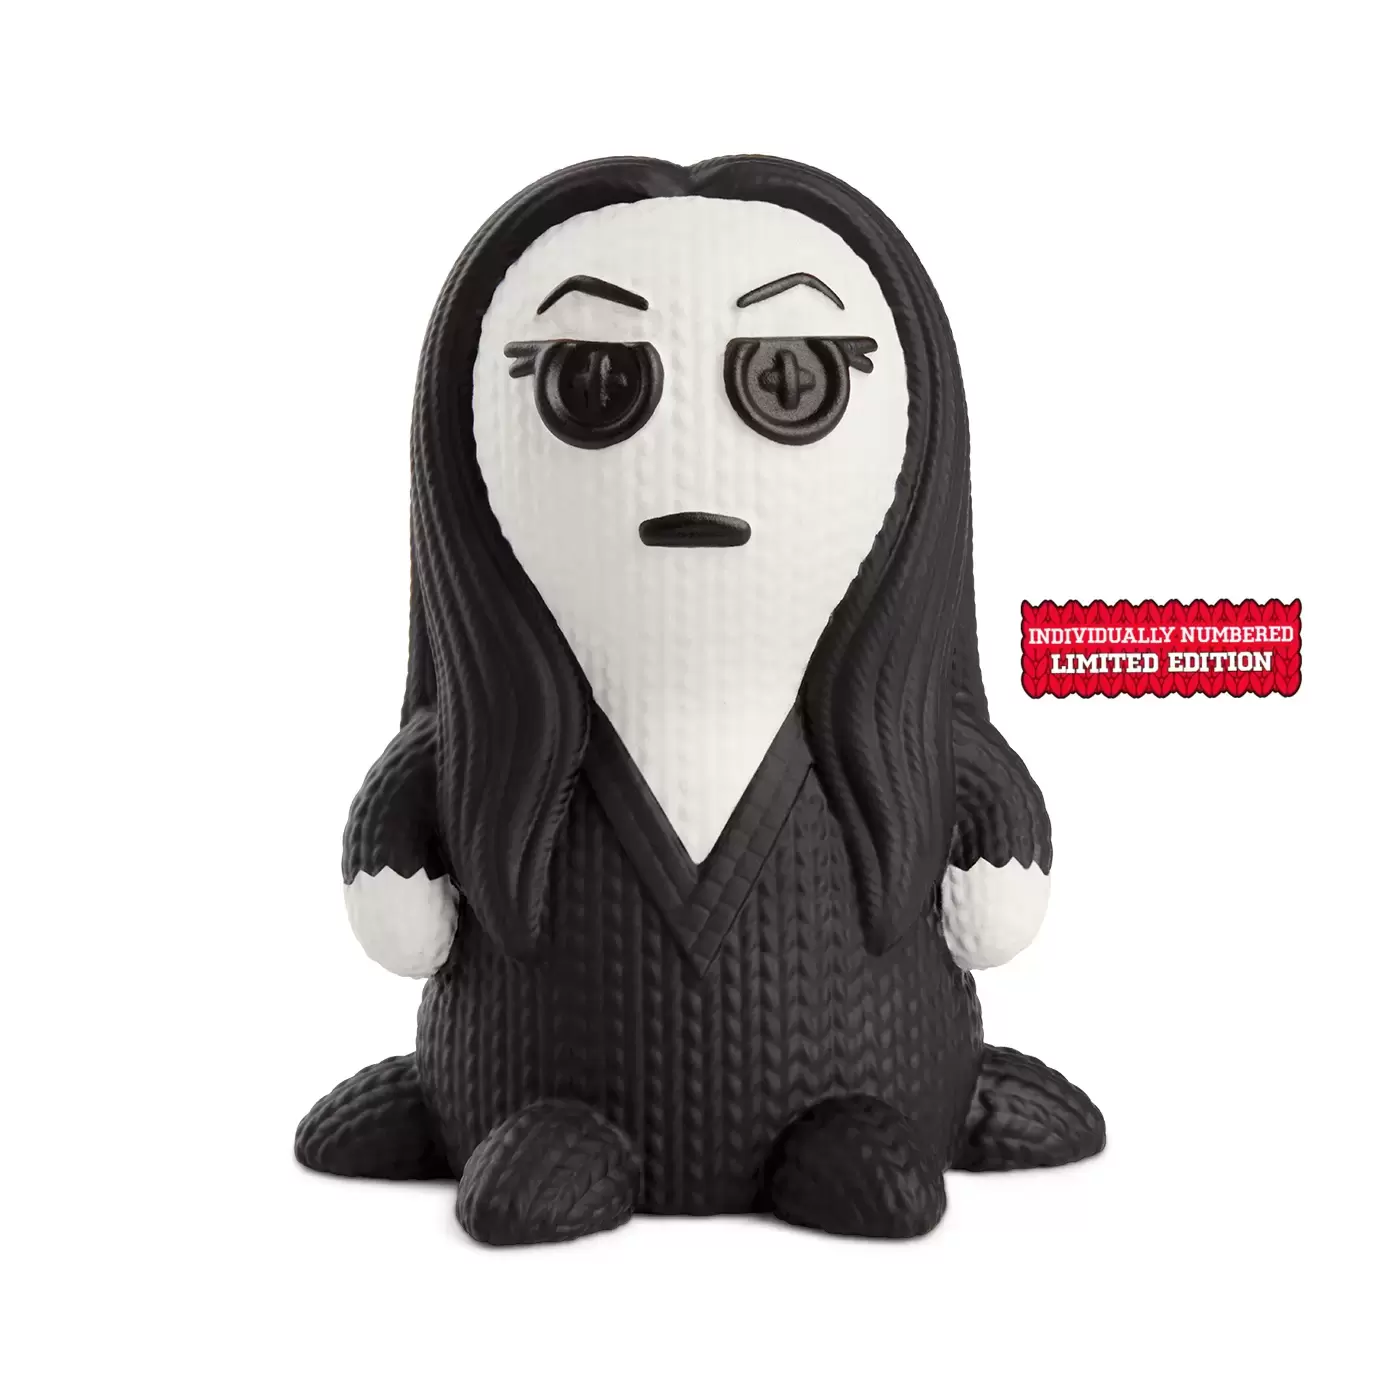 Handmade By Robots - The Addams Family - Morticia Glow in the Dark